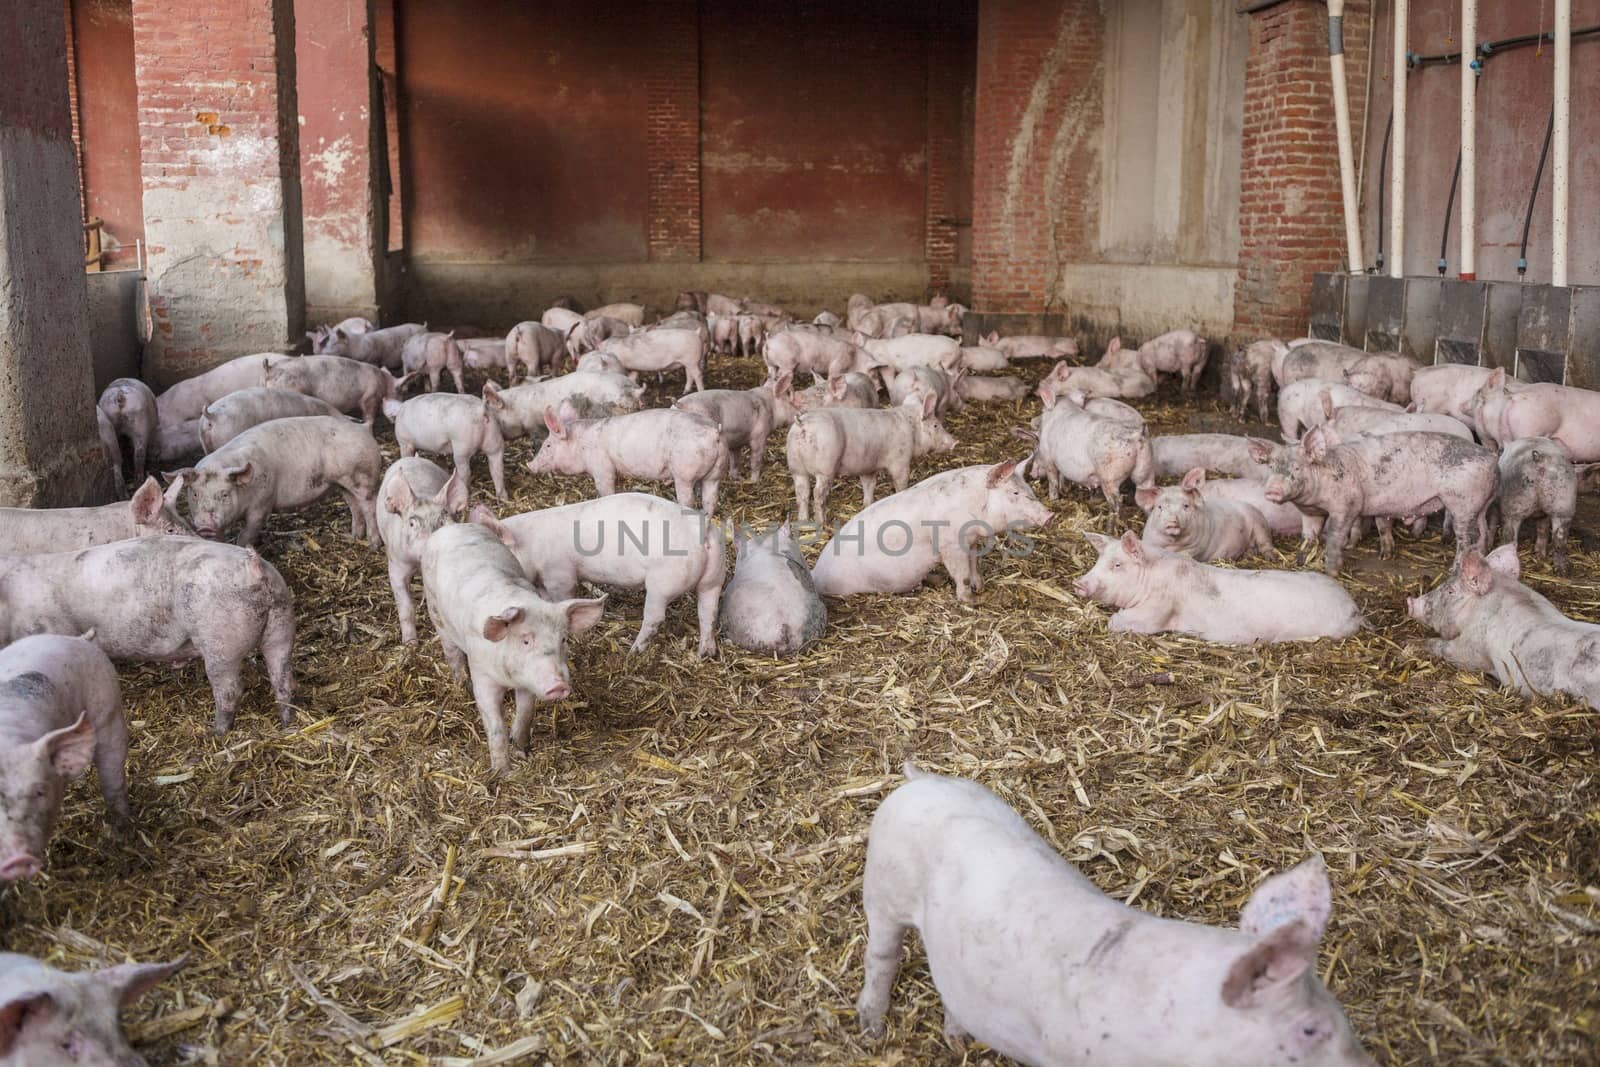 Picture of a pig shed with a group of pigs